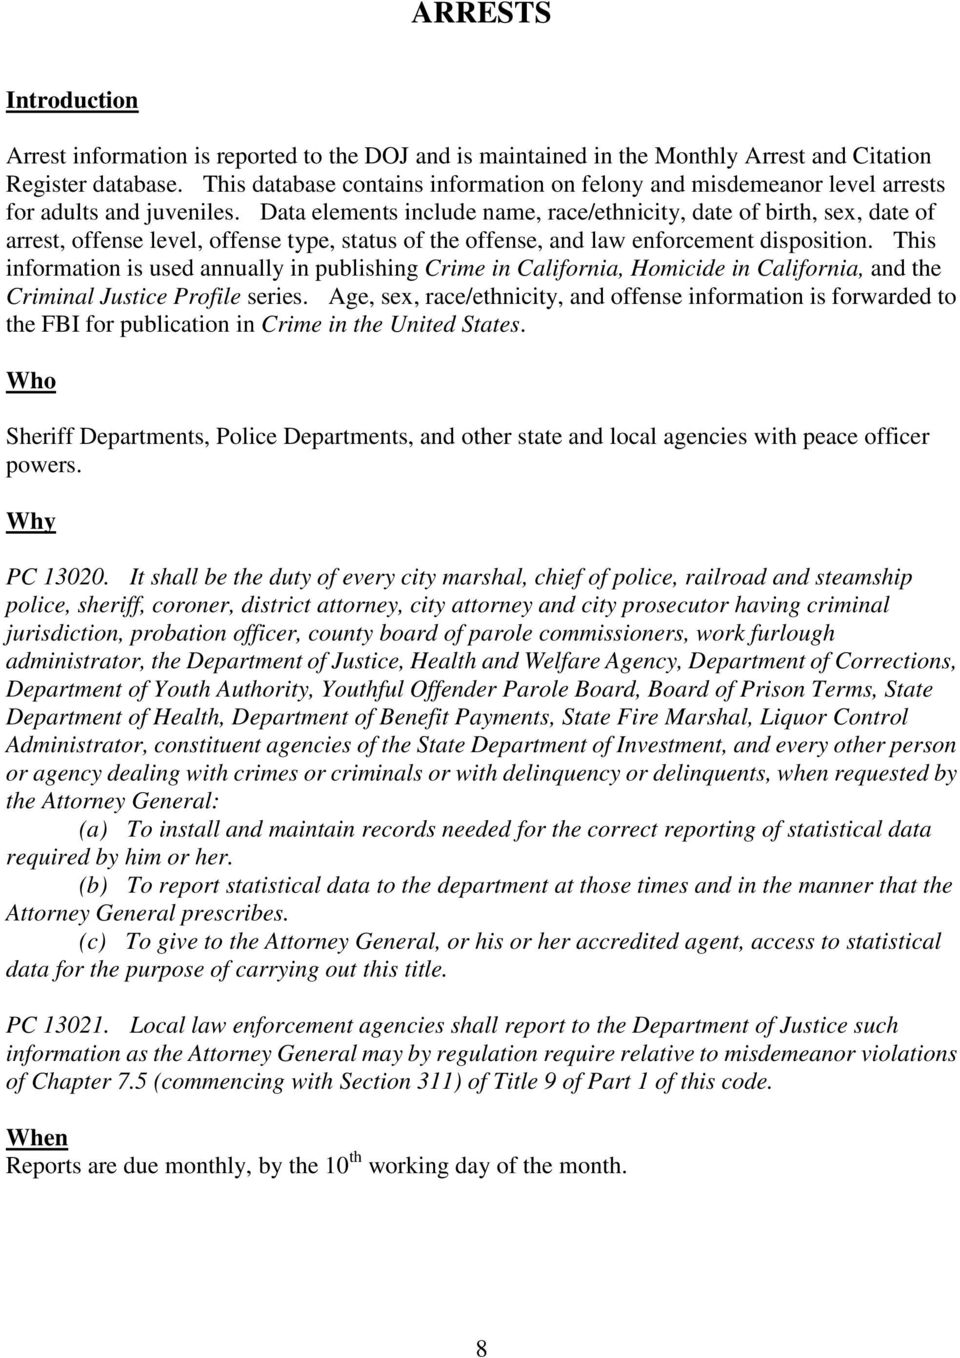 Data elements include name, race/ethnicity, date of birth, sex, date of arrest, offense level, offense type, status of the offense, and law enforcement disposition.